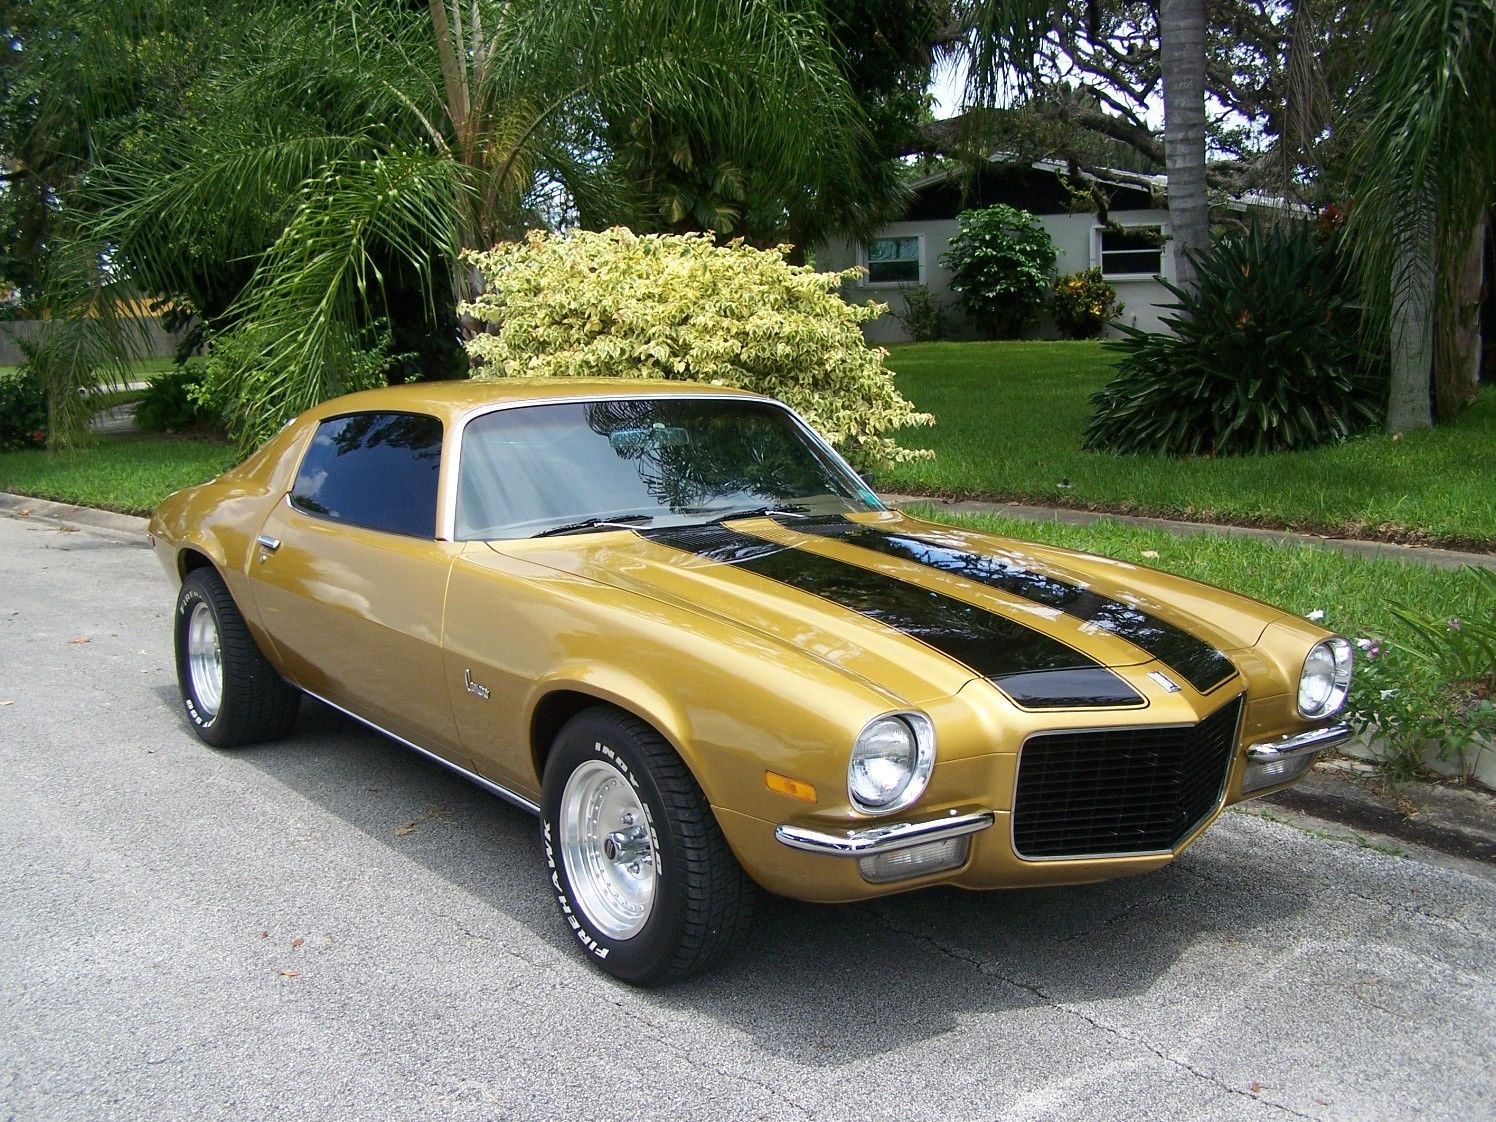 2015 Chevrolet 1970 Camaro RS Supercharged LT4 Concept